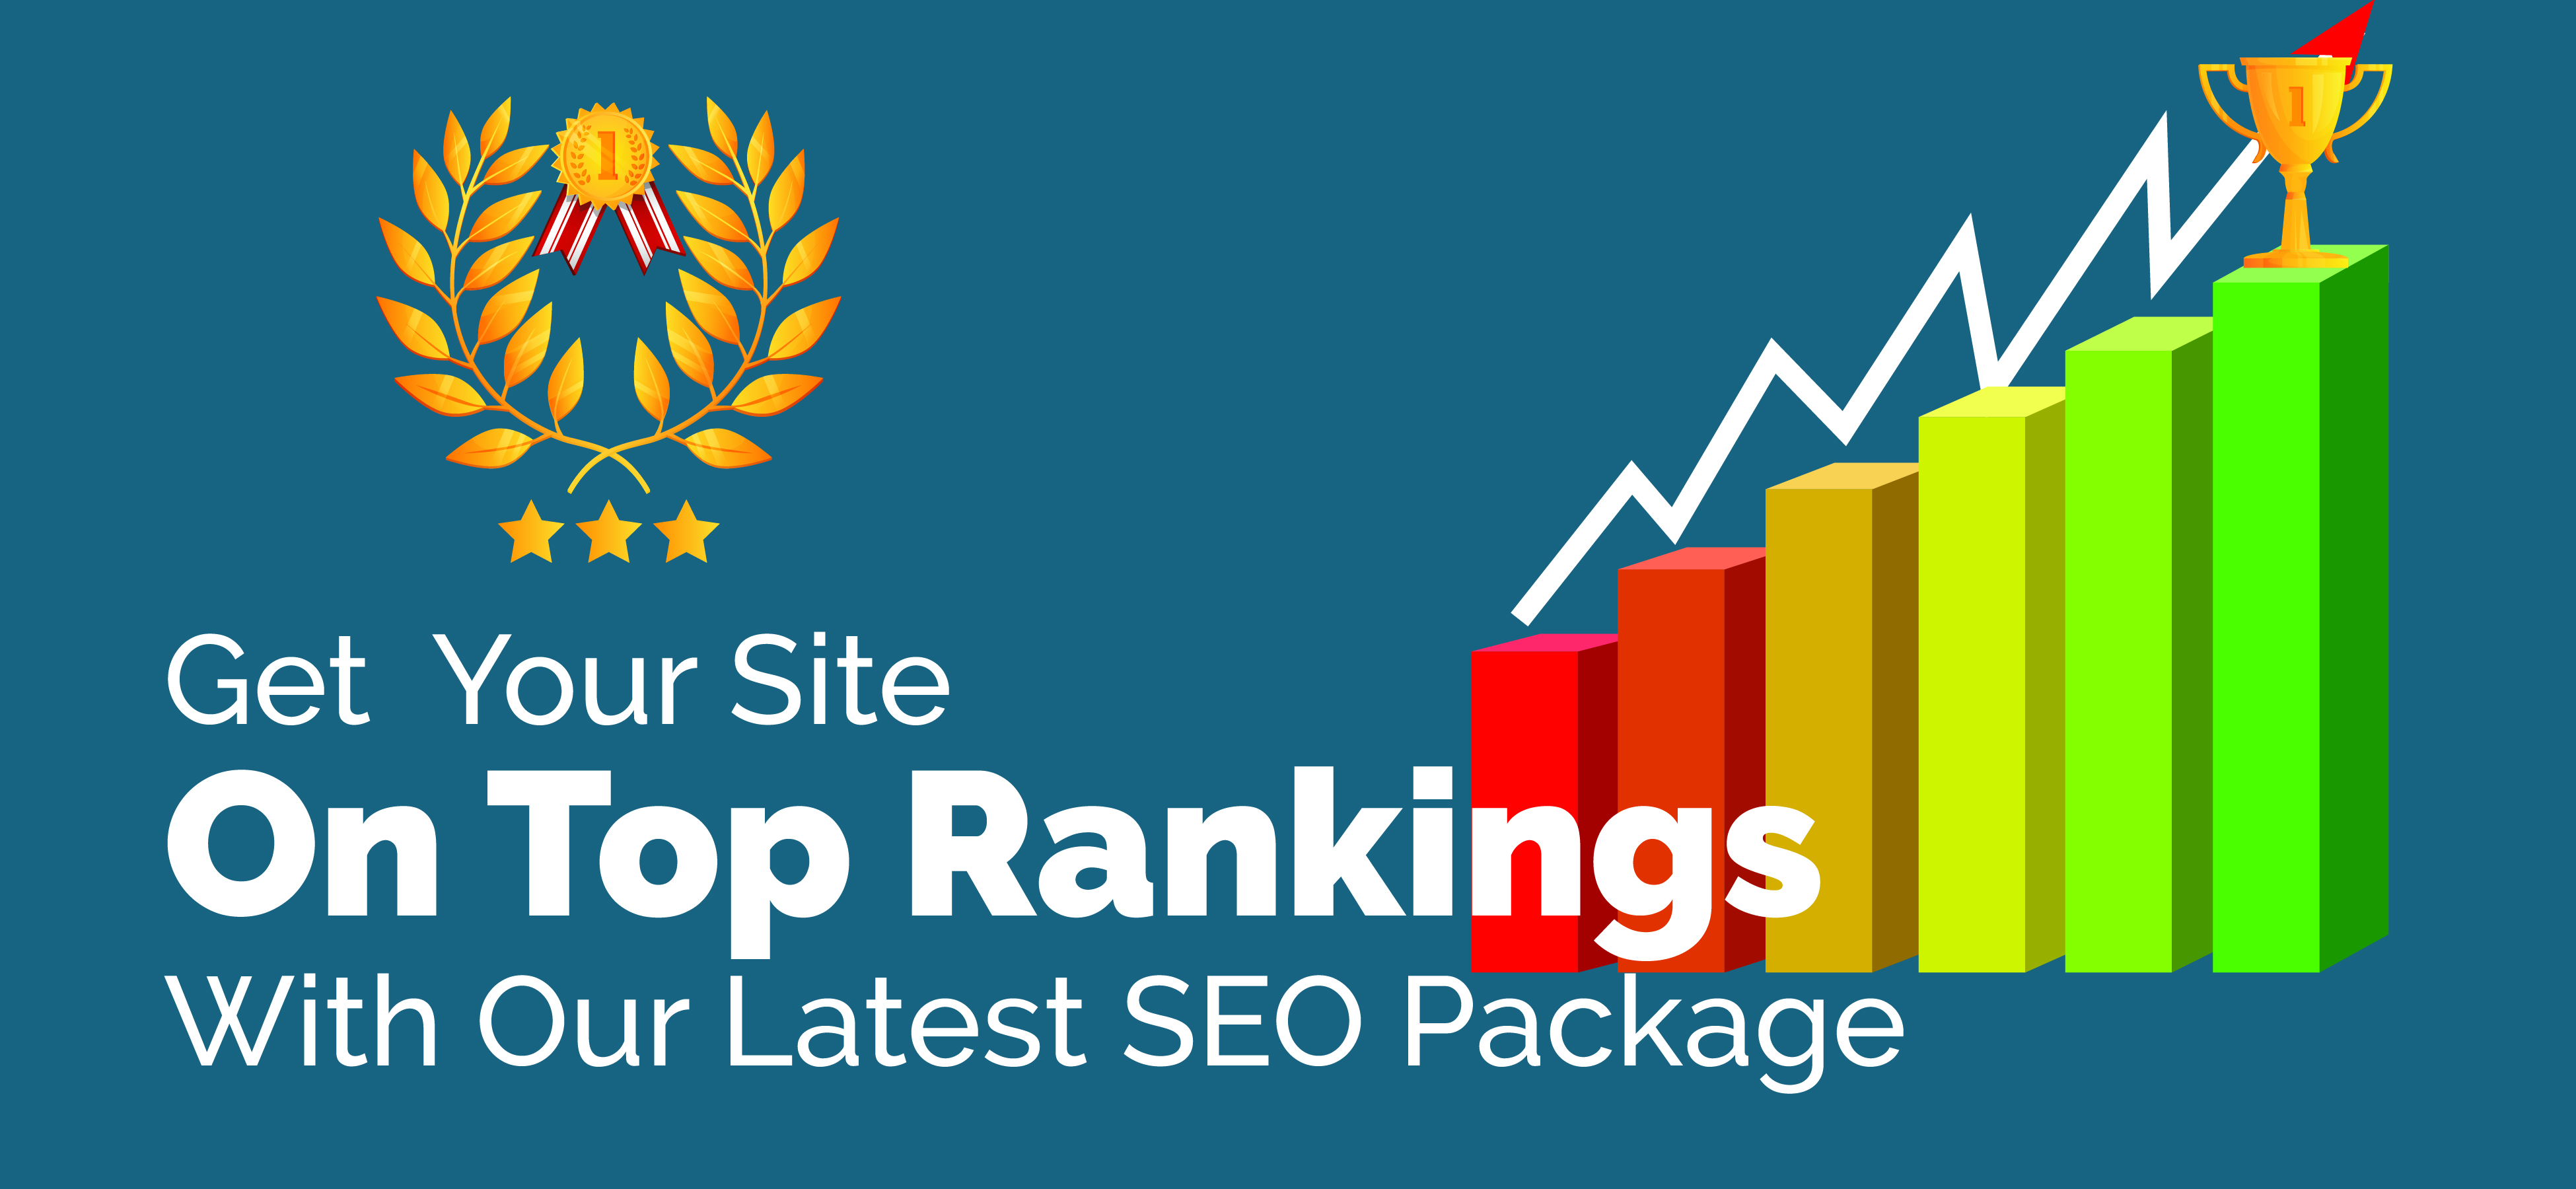 Premium & Latest SEO Package 4 Tier-2022 Update-Get On Google First Page, By White Hat SEO Technique